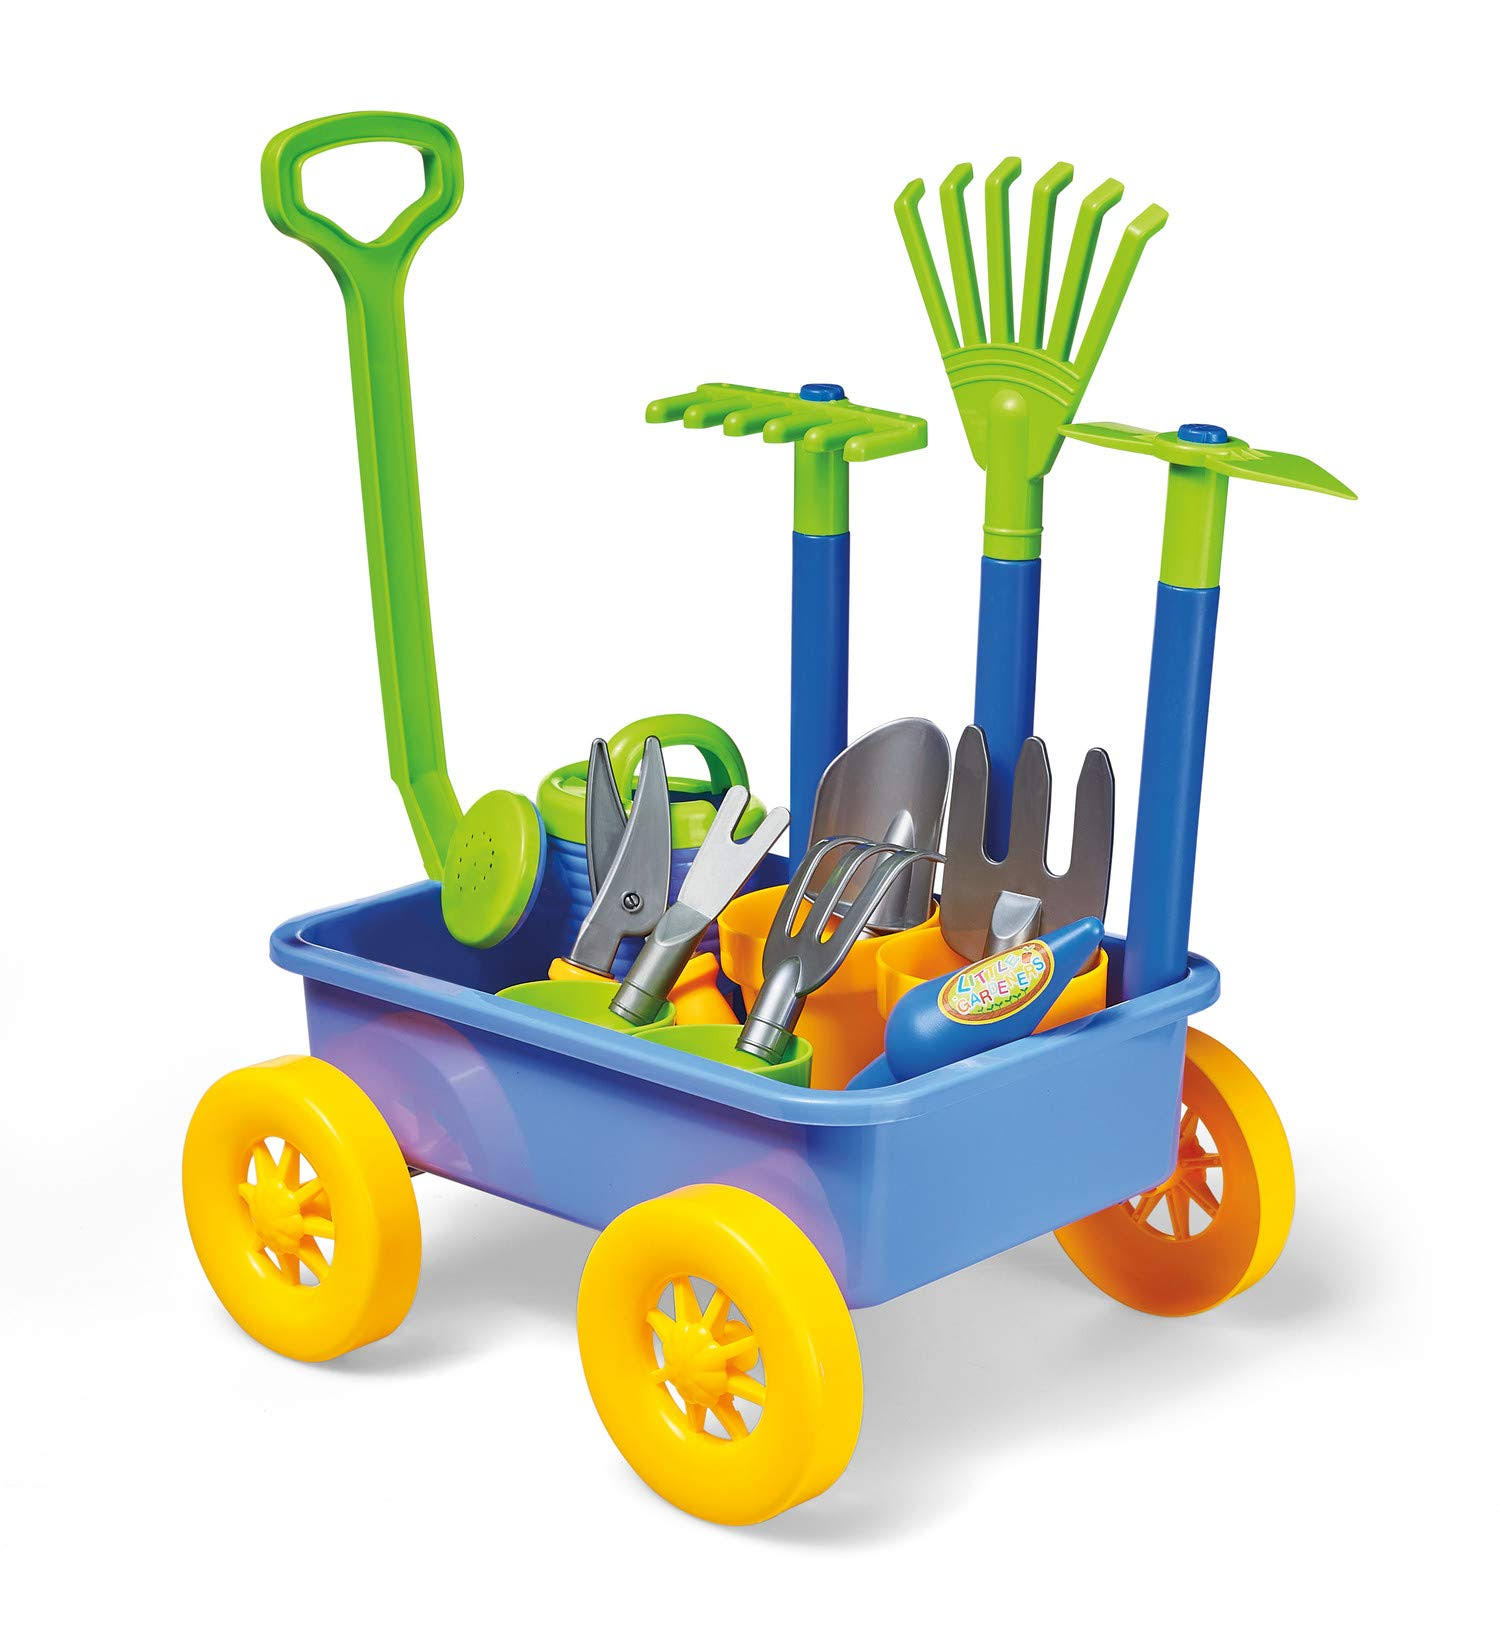 Kidoozie My First Gardening Set, for Children Ages 3 and up